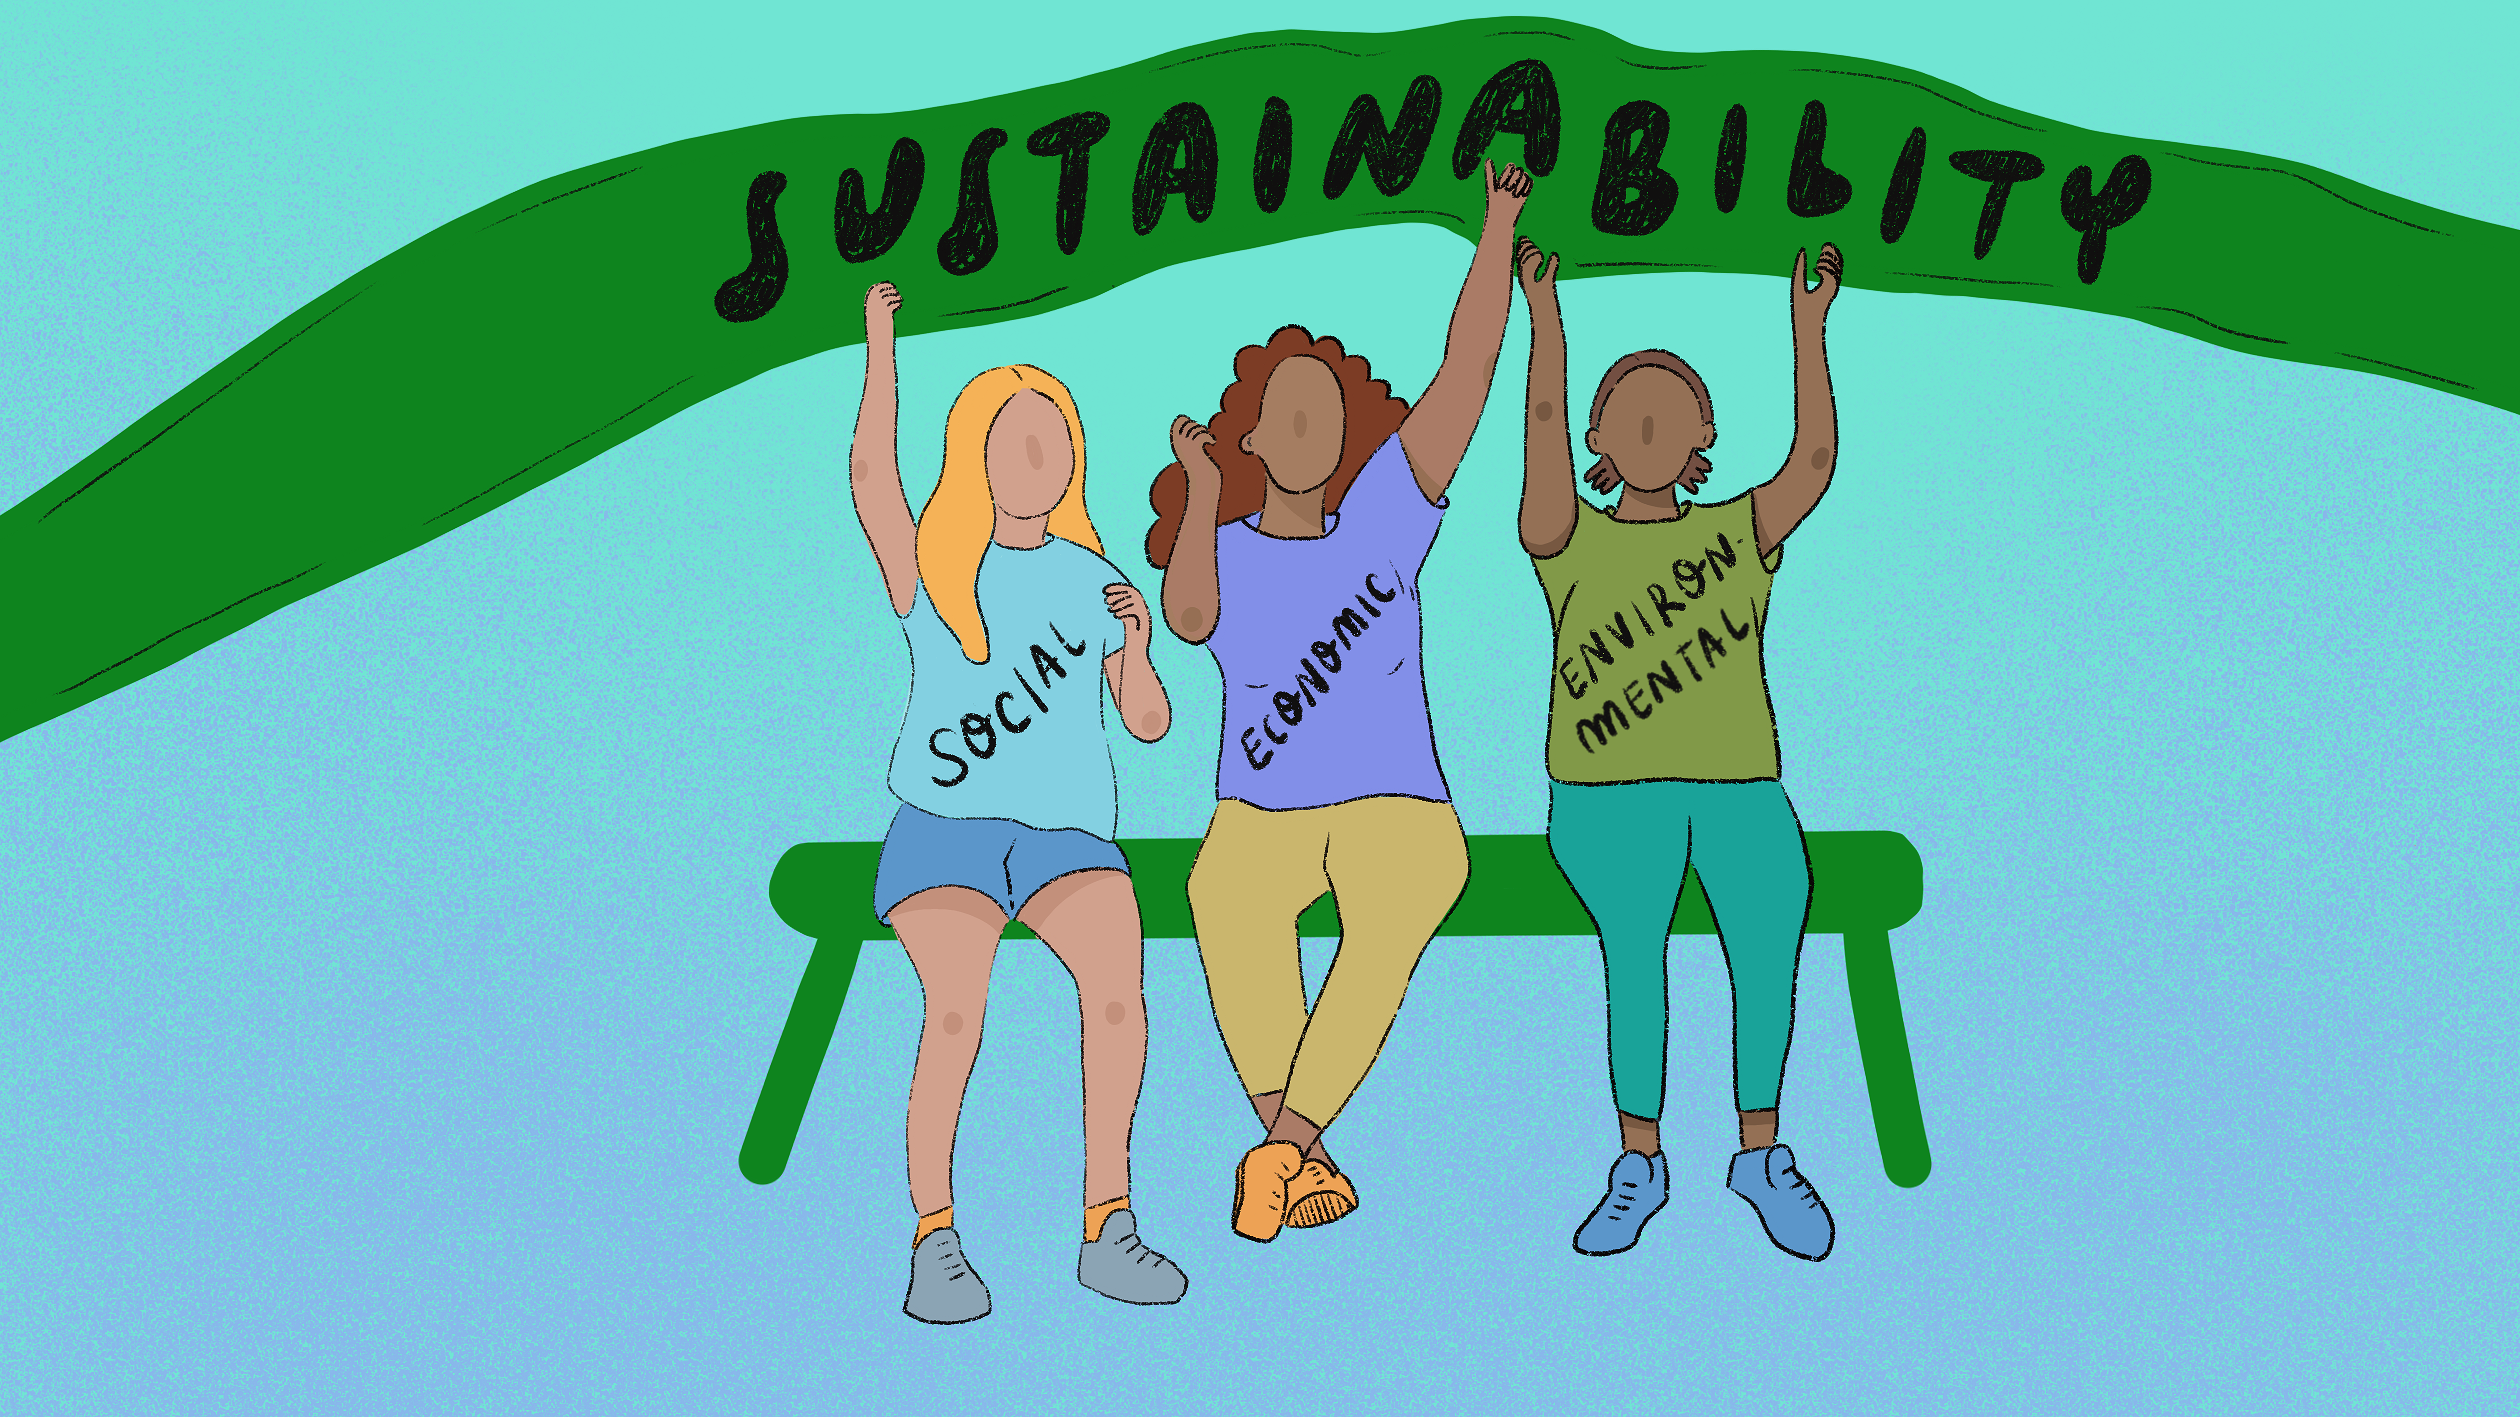 Let’s talk about sustainability and learning mobilities